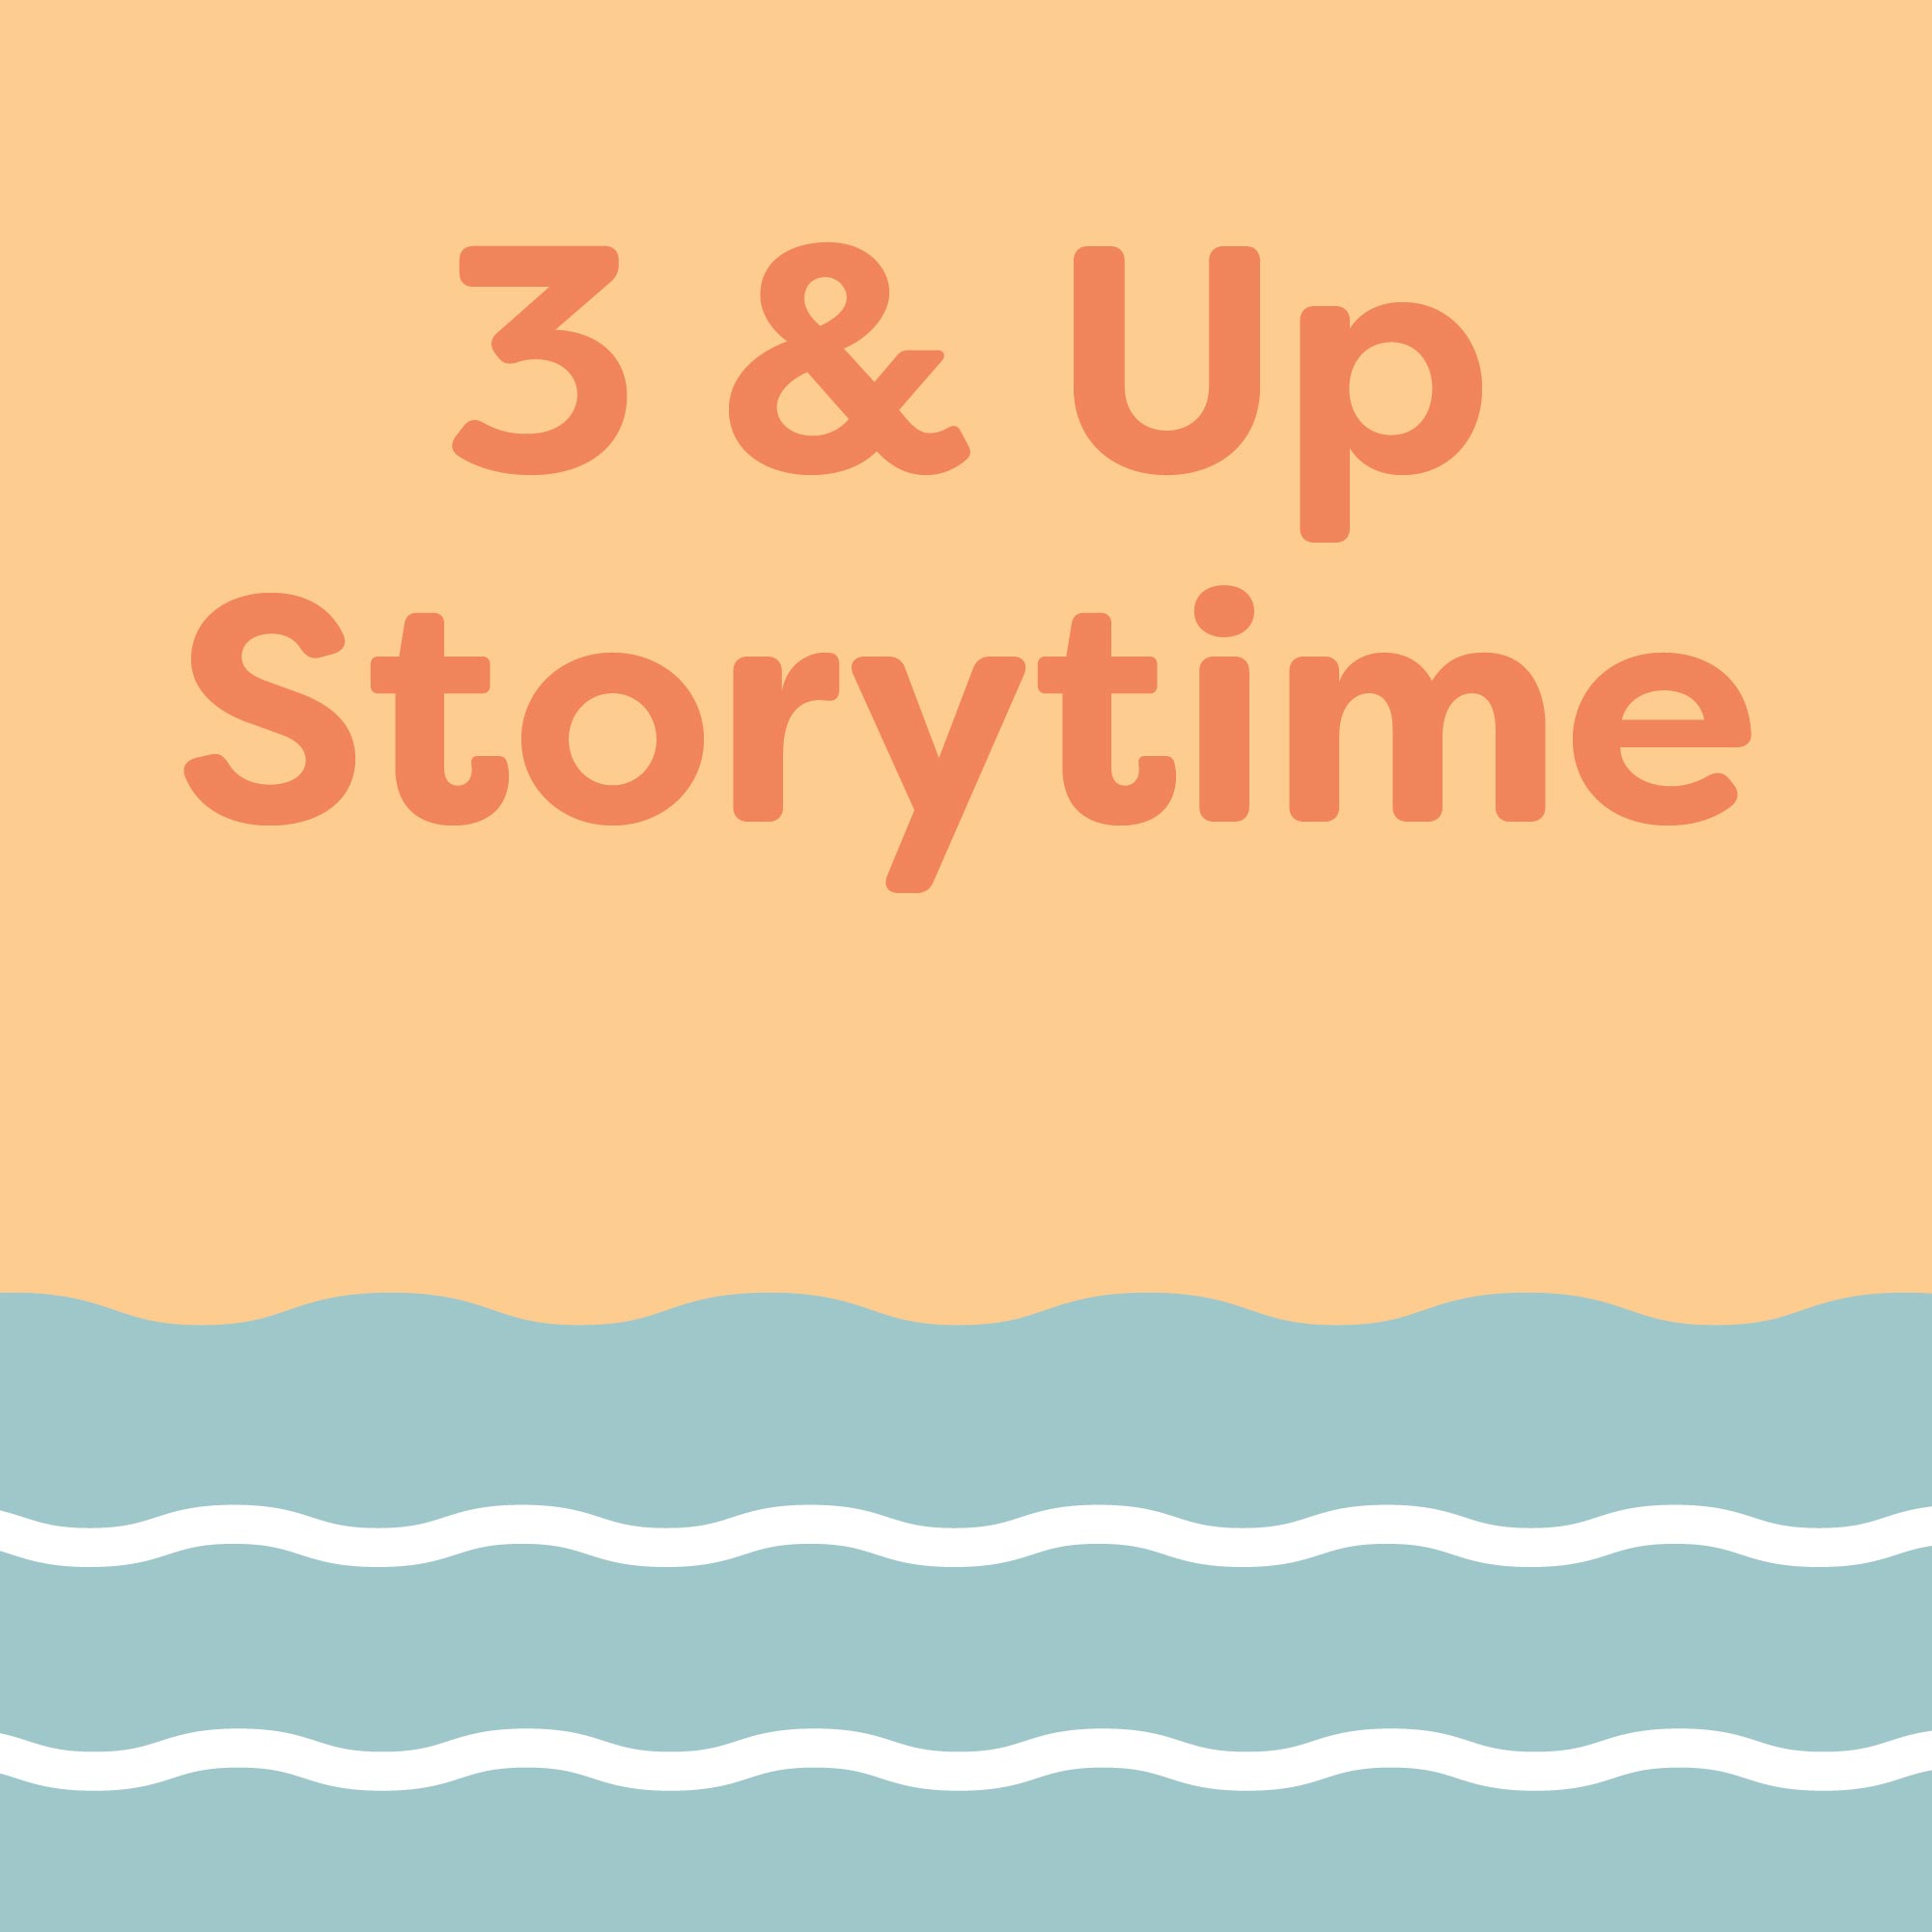 3 & Up Storytime